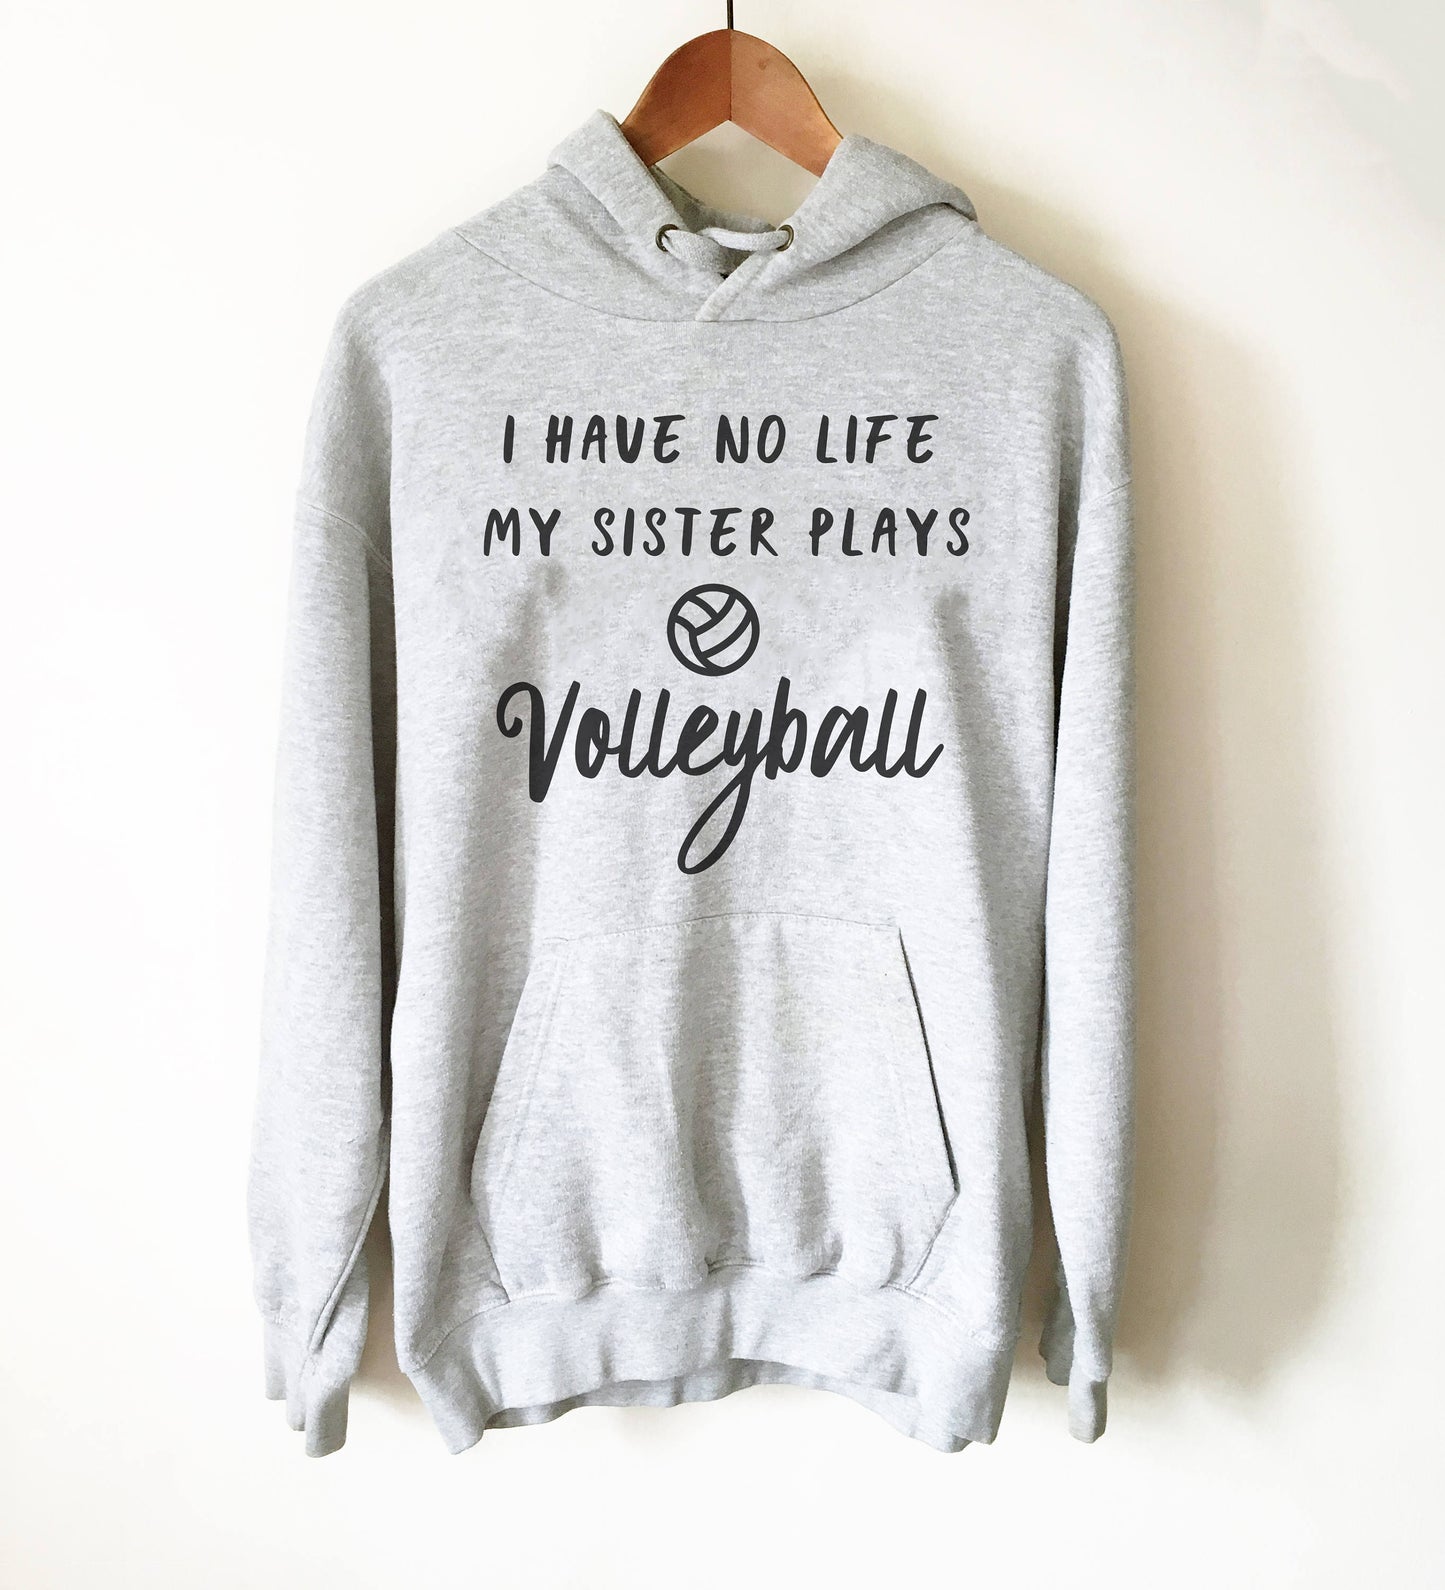 I Have No Life My Sister Plays Volleyball Hoodie - Volleyball Shirt, Volleyball gift, Volleyball Sister, Sports Sister Shirt